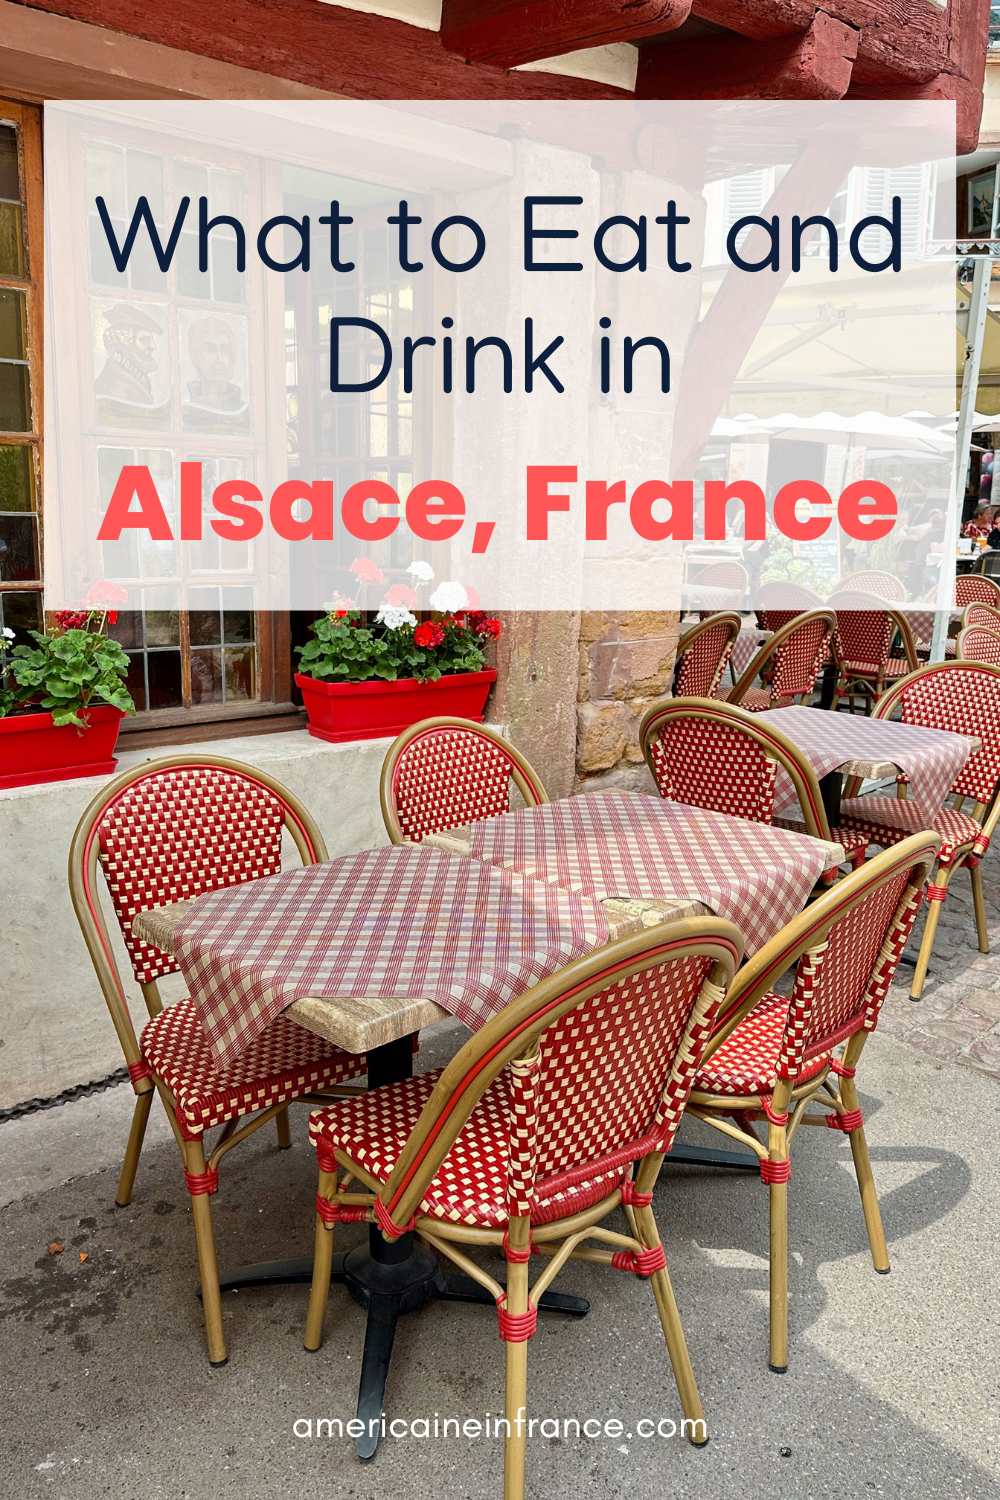 Alsace Food & Drink: Specialties You Need to Try